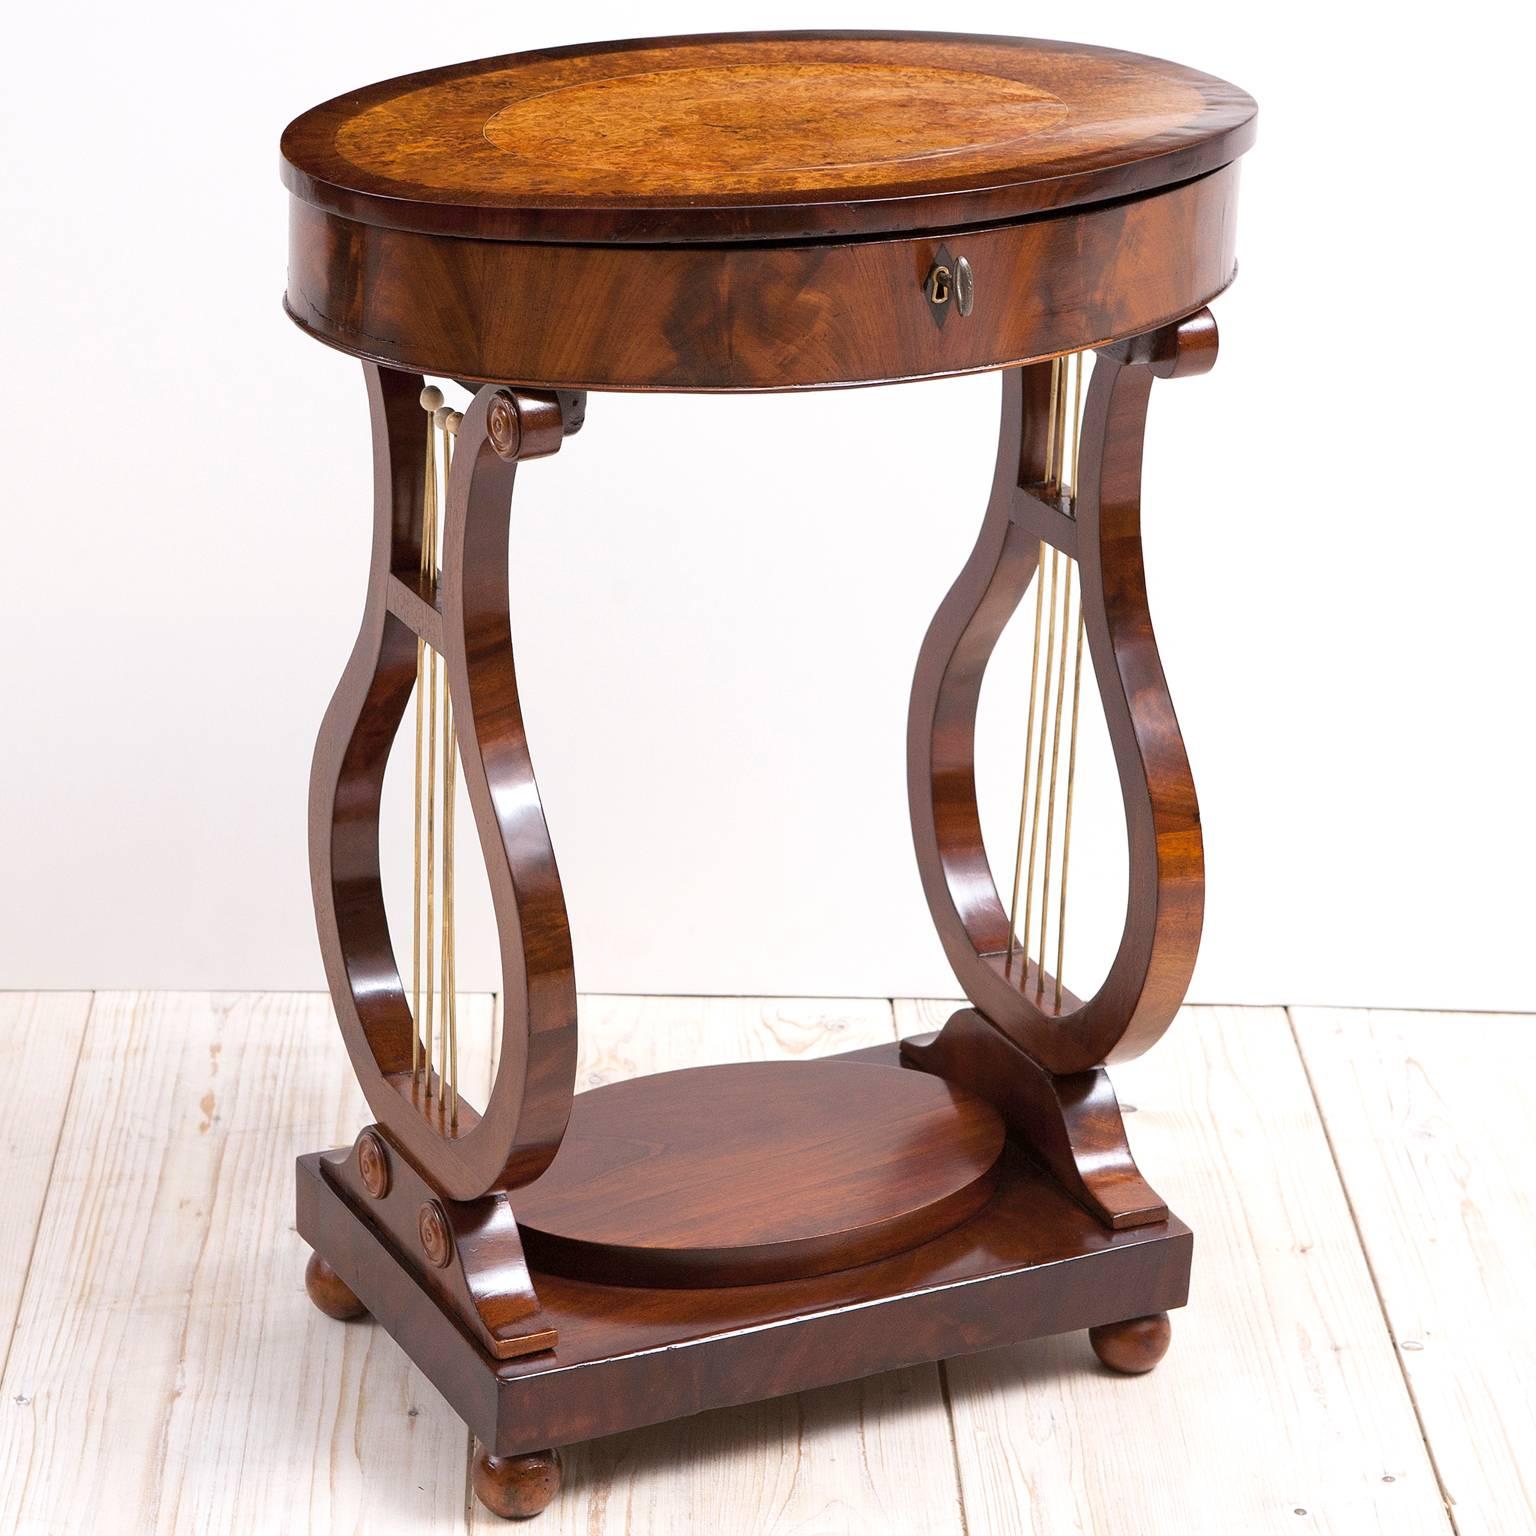 Karl Johan sewing table with lyre base, Sweden, circa 1830. 
Outstanding lyre base sewing table in French polished mahogany. Top is banded in mahogany with burled birch and line inlay of kings wood. Beautiful, complete interior featuring mahogany